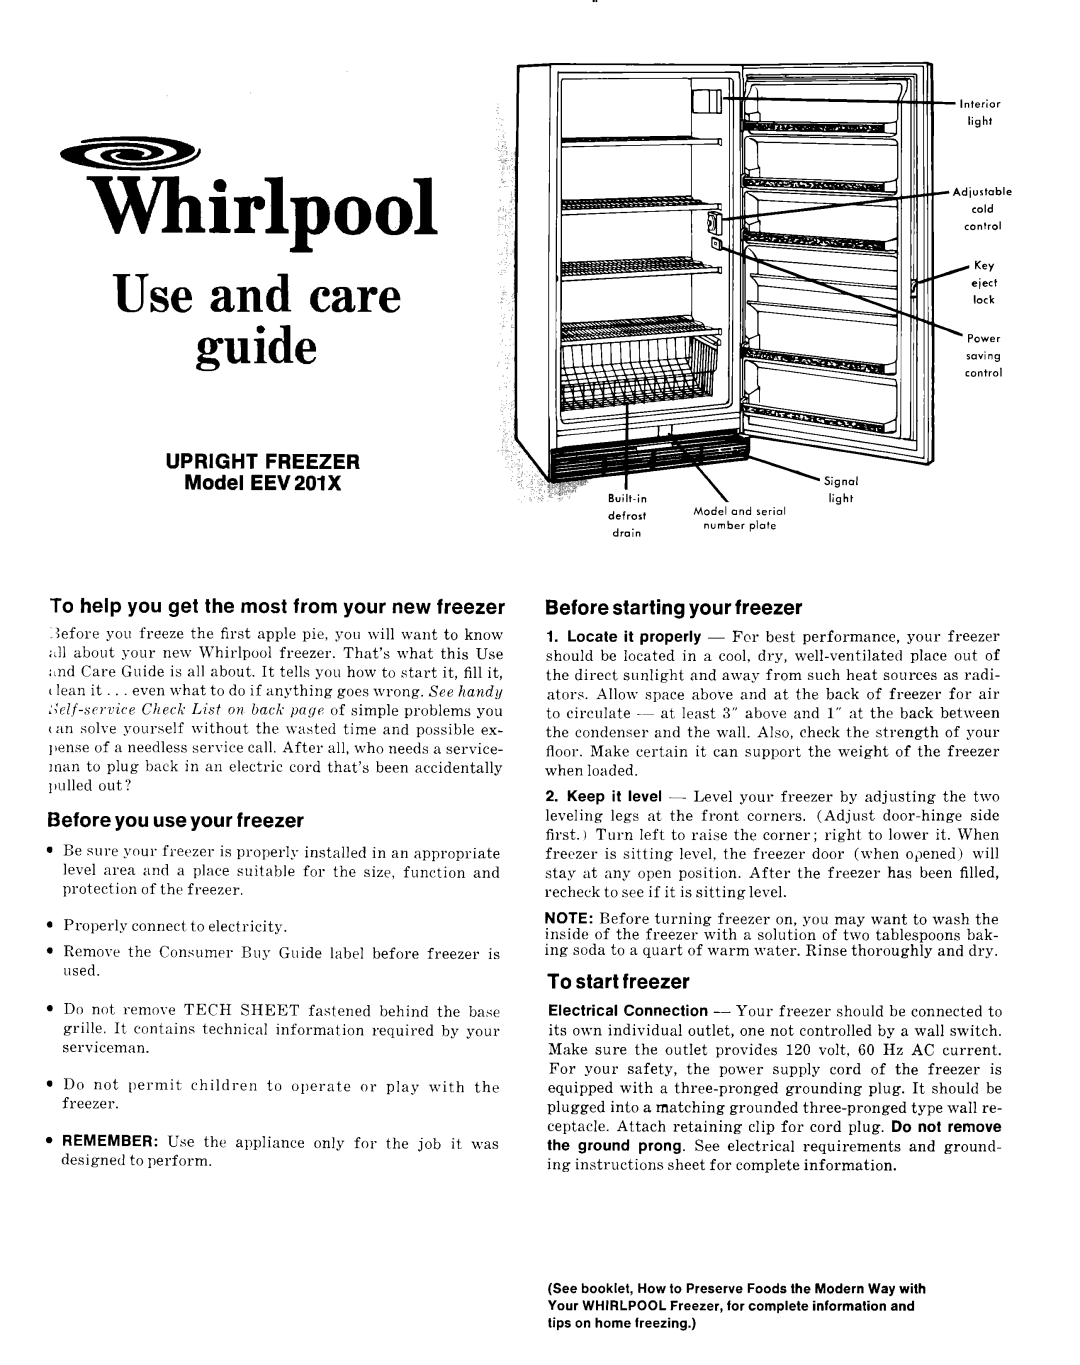 Whirlpool EEV 201 X manual Freezer, Model, Eev, To help you get the most from your new freezer, To start freezer, Upright 